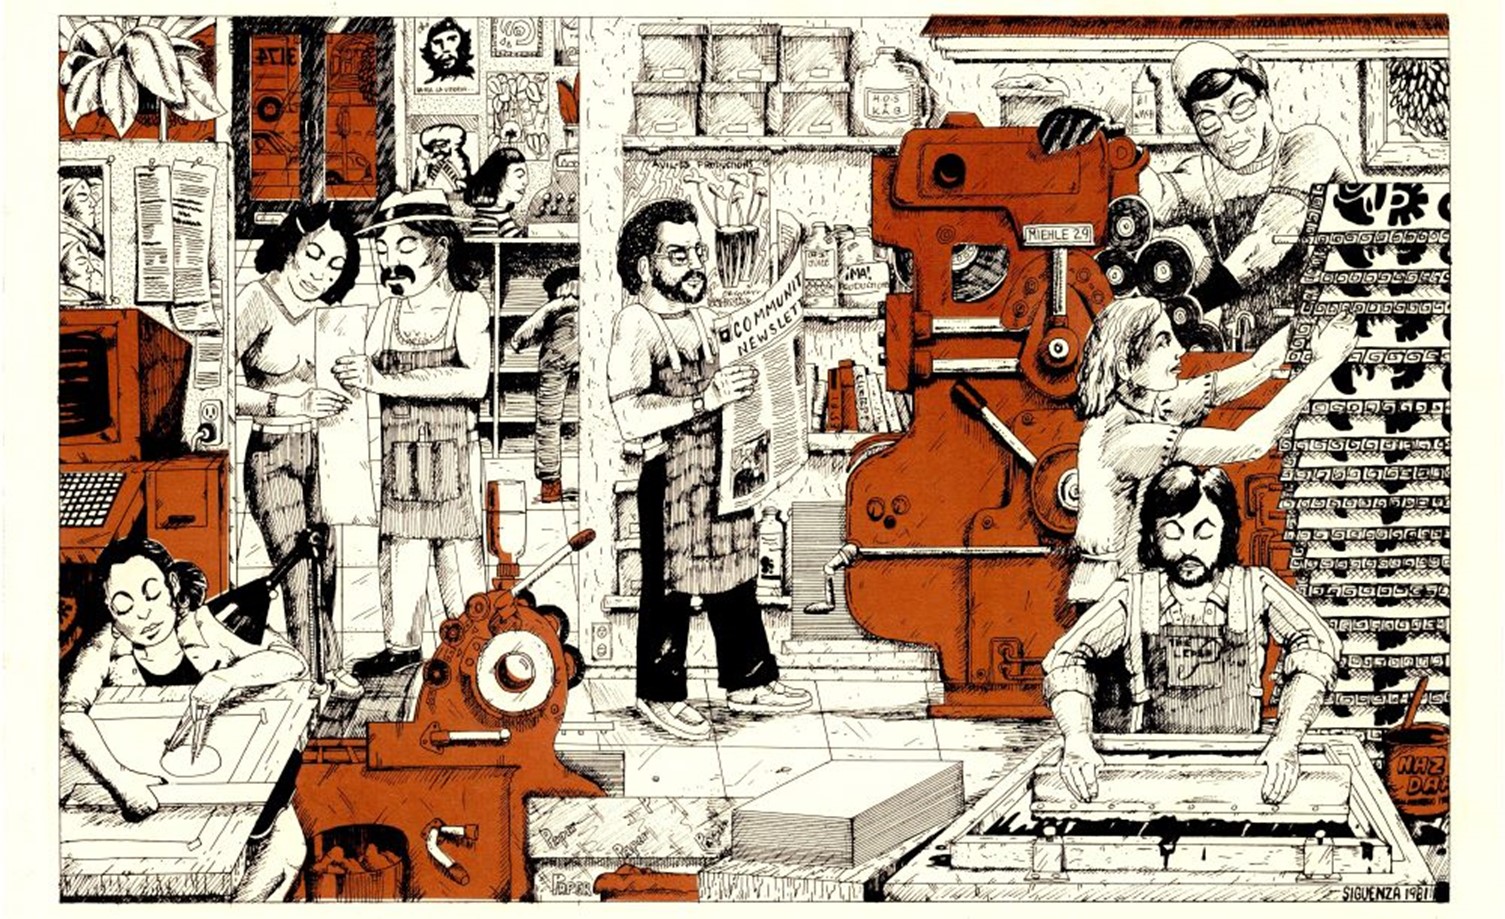 A day in the life, 1981. Herbert Sigüenza. Printed by La Raza Graphics 